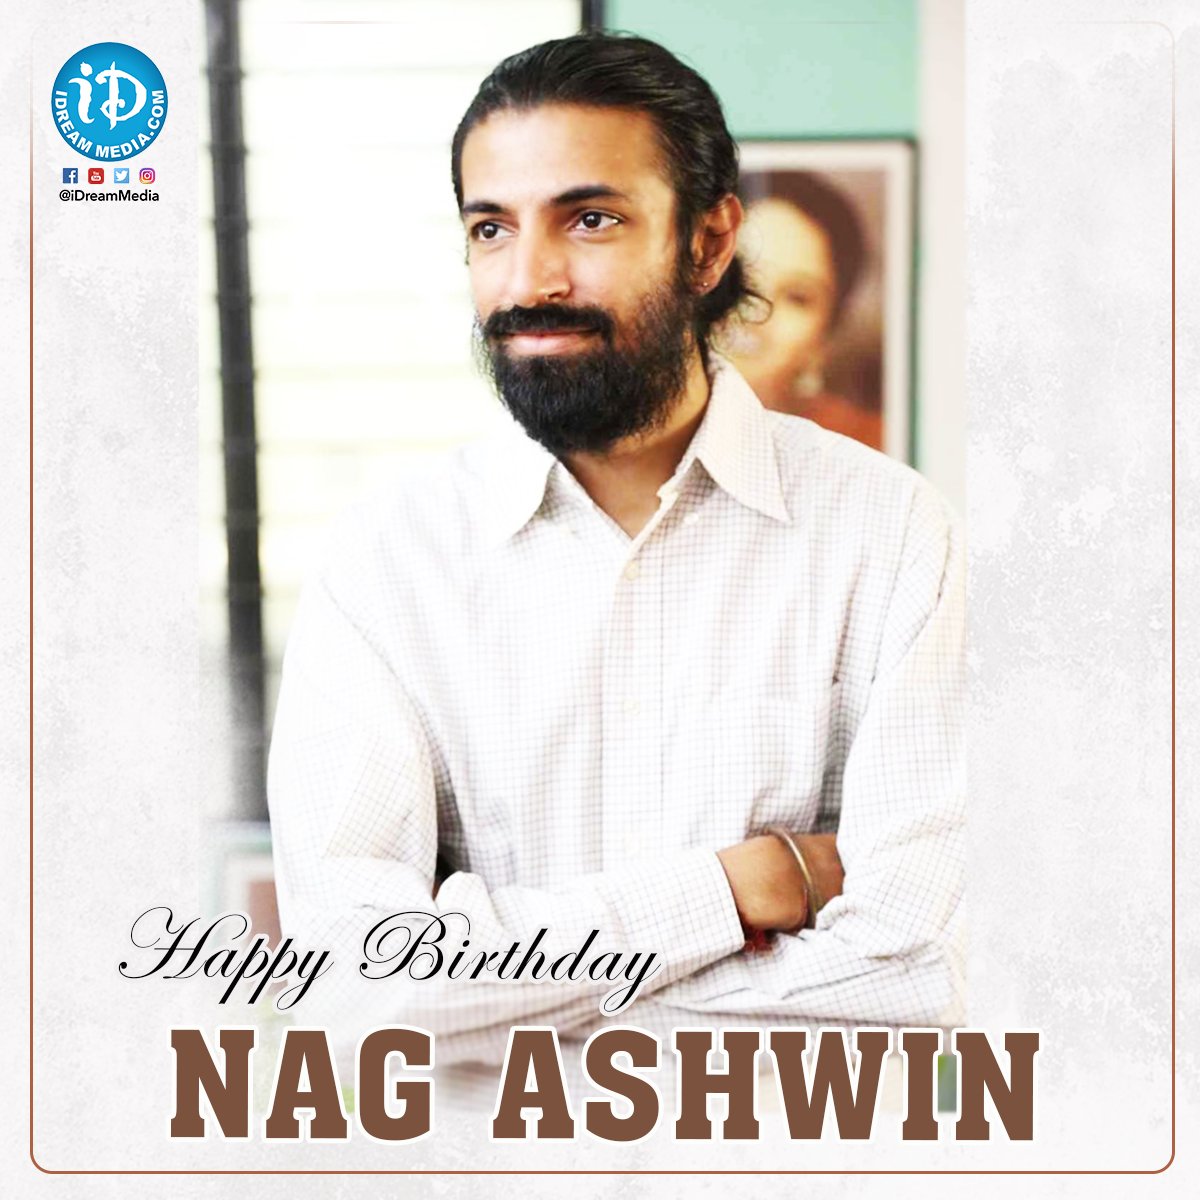 Wishing our #Prabhas21 Director @nagashwin7 A Very Happy Birthday!!

We are very excited to hear more details about #Prabhas21.

All the best darling 👍
#HappyBirthdayNagAshwin #HBDNagAshwin 

#DecadeForClassicDarling